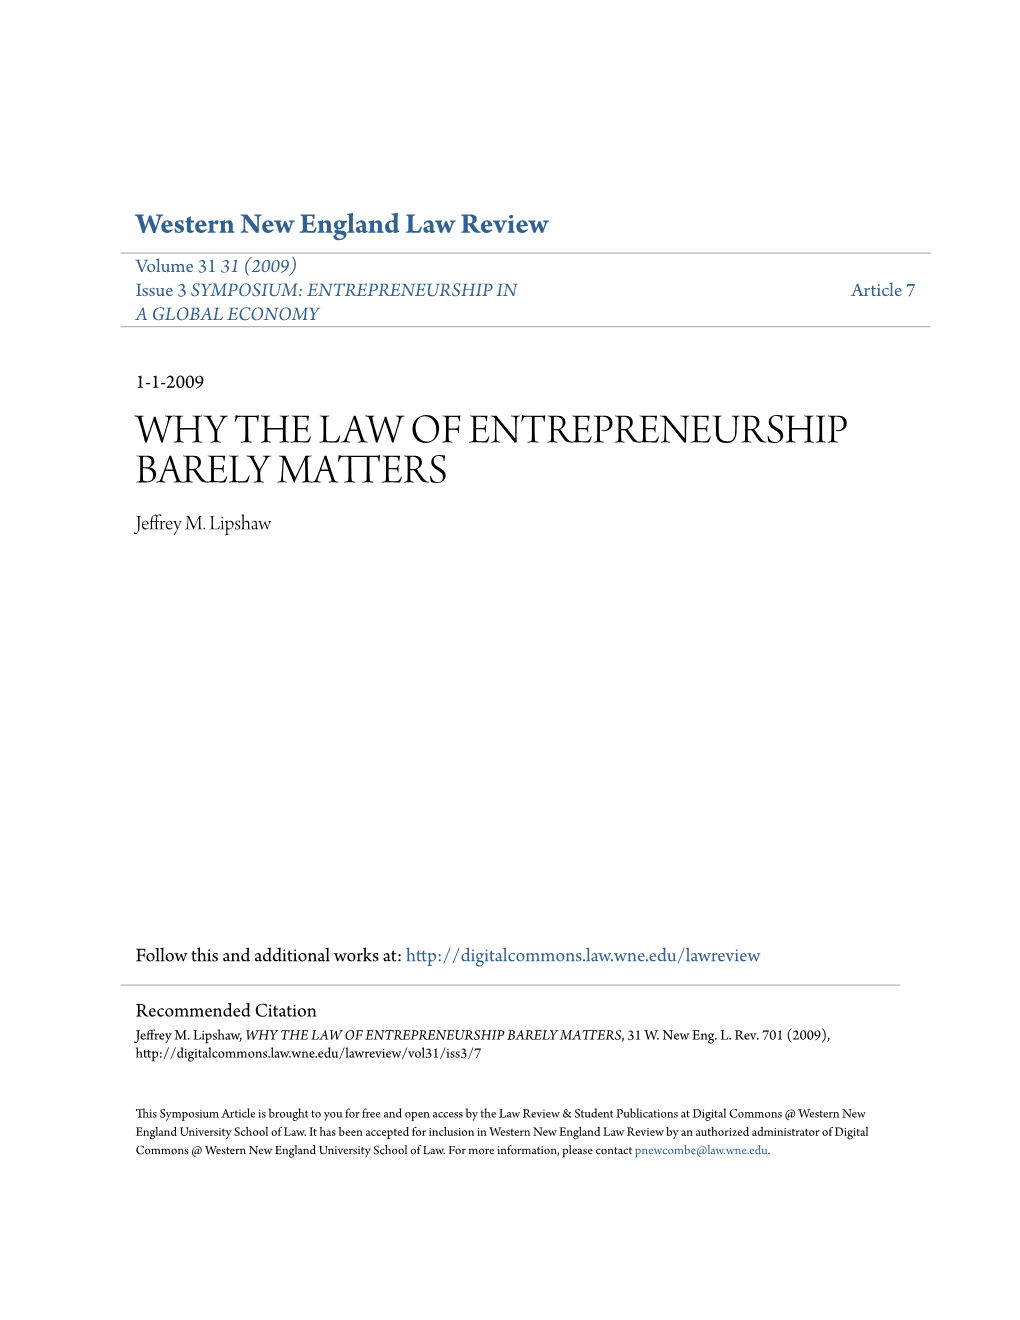 WHY the LAW of ENTREPRENEURSHIP BARELY MATTERS Jeffrey M